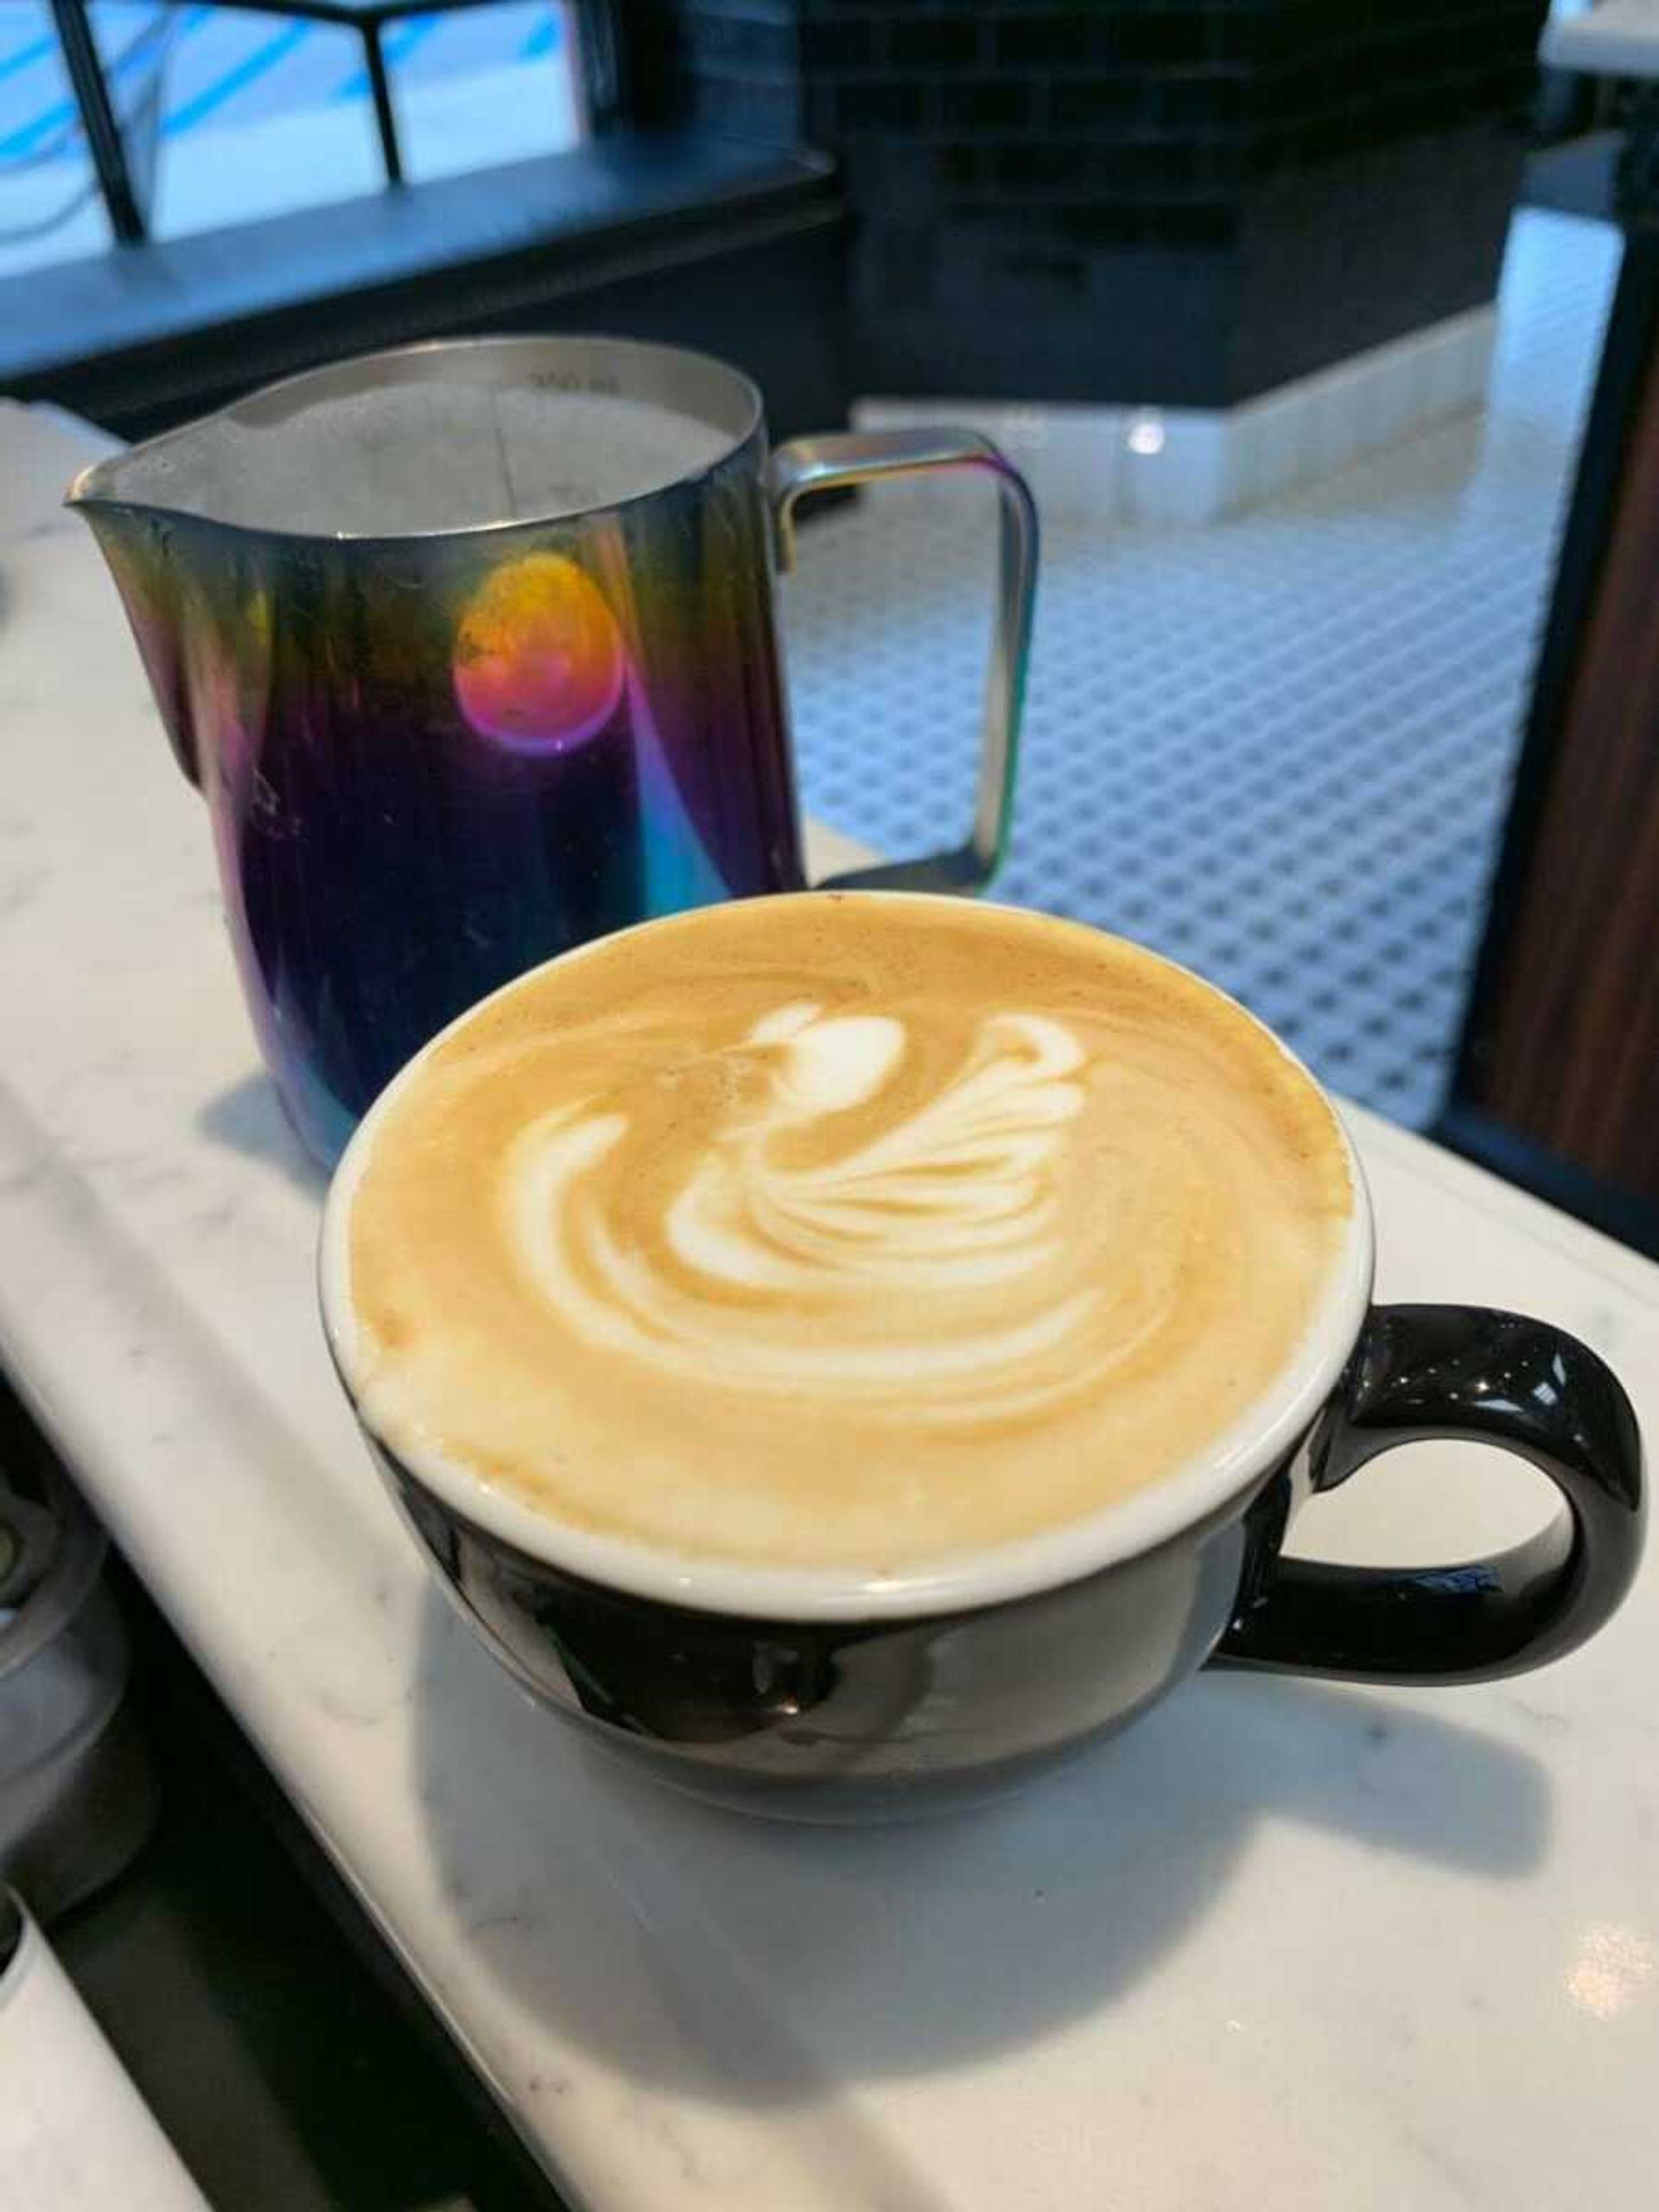 He arrives early to Baristas to practice latte art prior to the coffee shop’s opening. He takes a picture of each day’s creation; pictured above is a swan.
